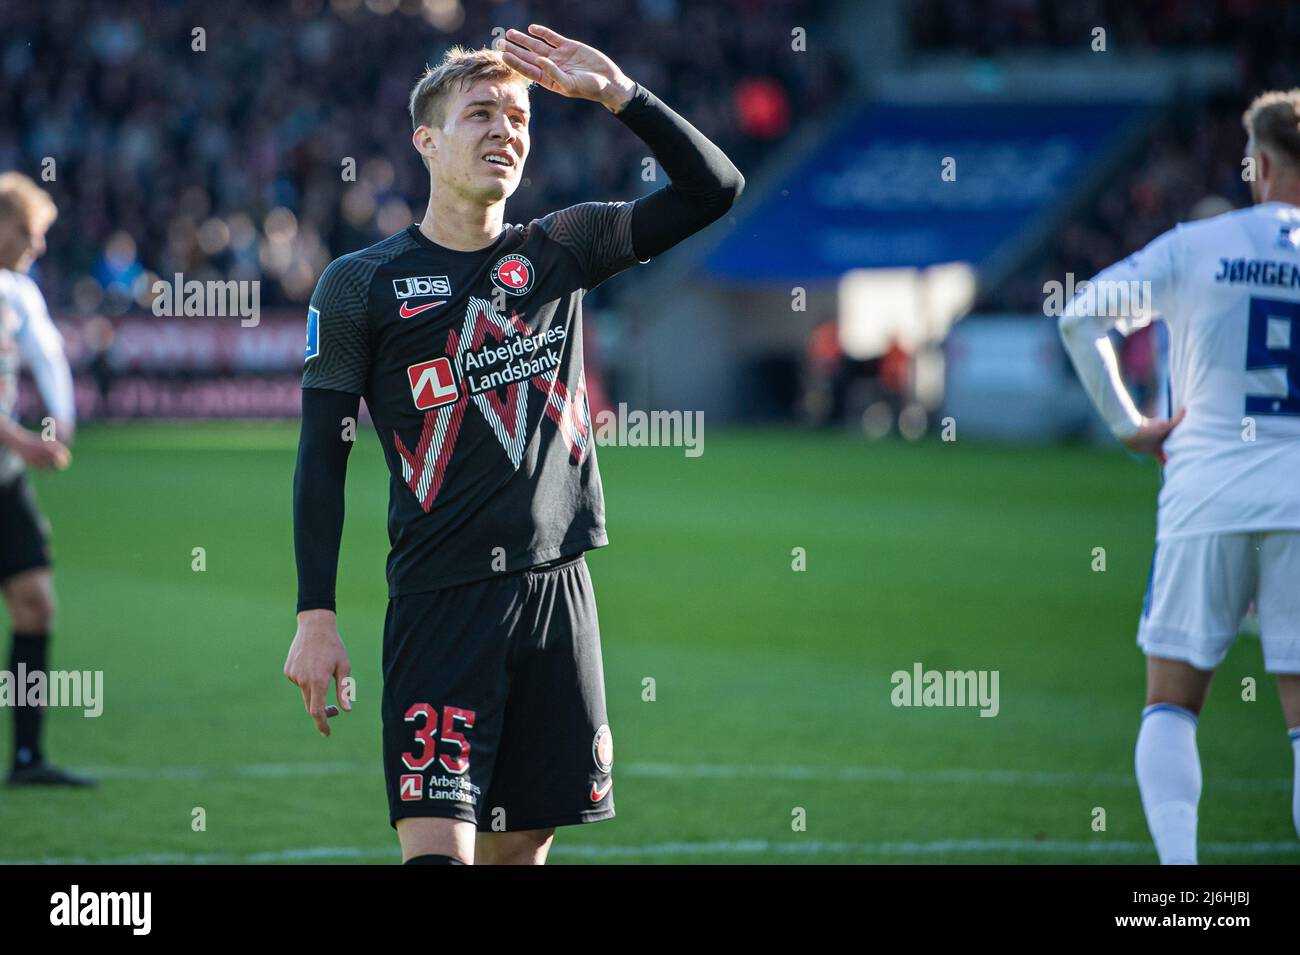 Herning, Denmark. 01st, May 2022. Charles (35) of FC Midtjylland seen during the 3F Superliga match between FC Midtjylland and FC Copenhagen at MCH Arena in Herning. (Photo credit: Gonzales Photo - Morten Kjaer). Stock Photo